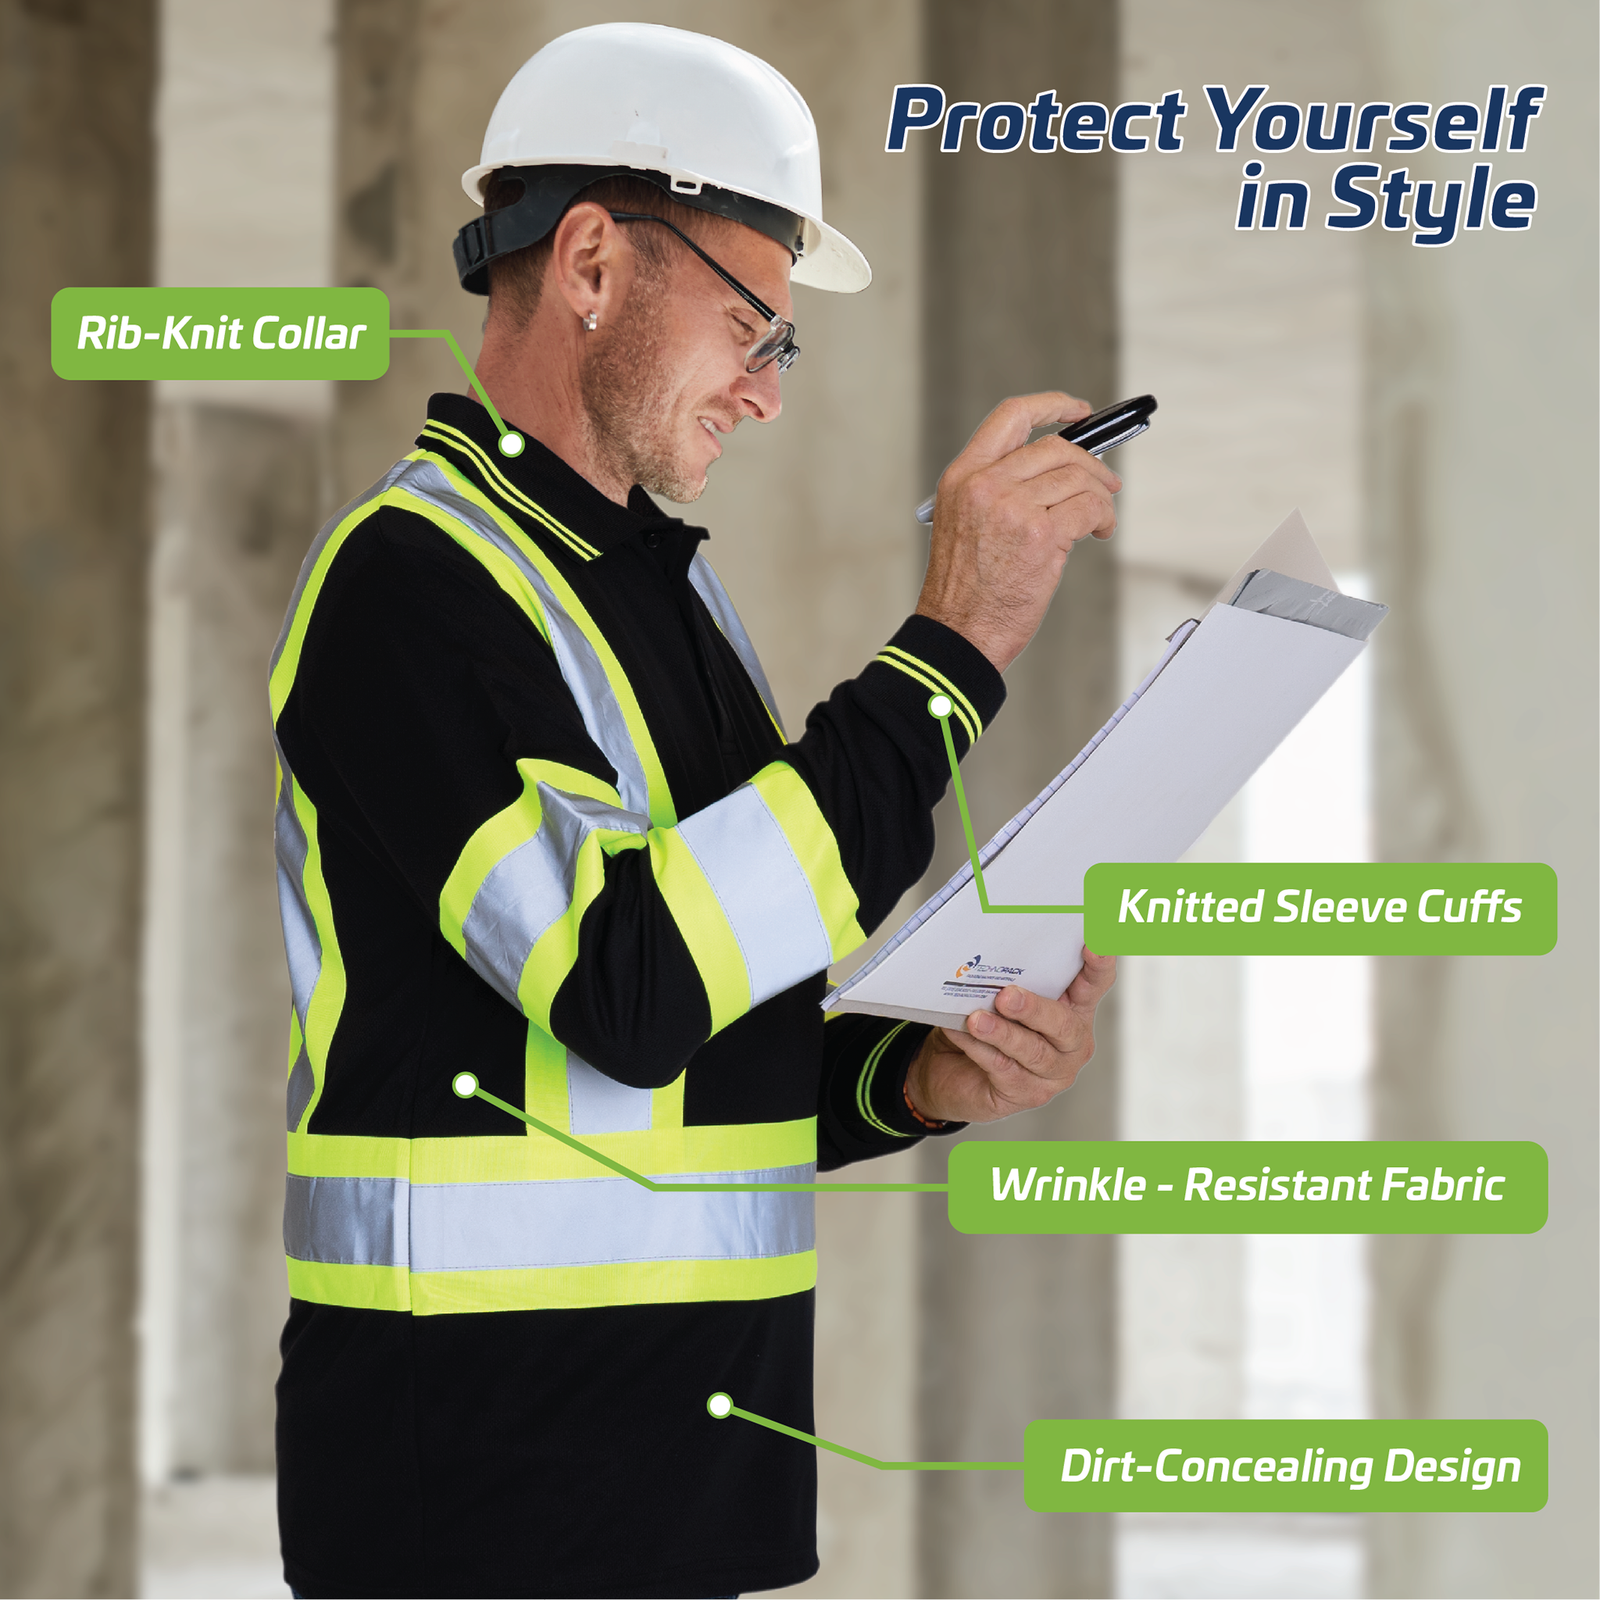 Worker wearing personal protection equipment and a hi visibility black and yellow long sleeve safety shirt. Features of shirt read: Protect yourself in style, rib knit collar, knitted sleeve cuffs, wrinkle resistant fabric, dirt concealing design